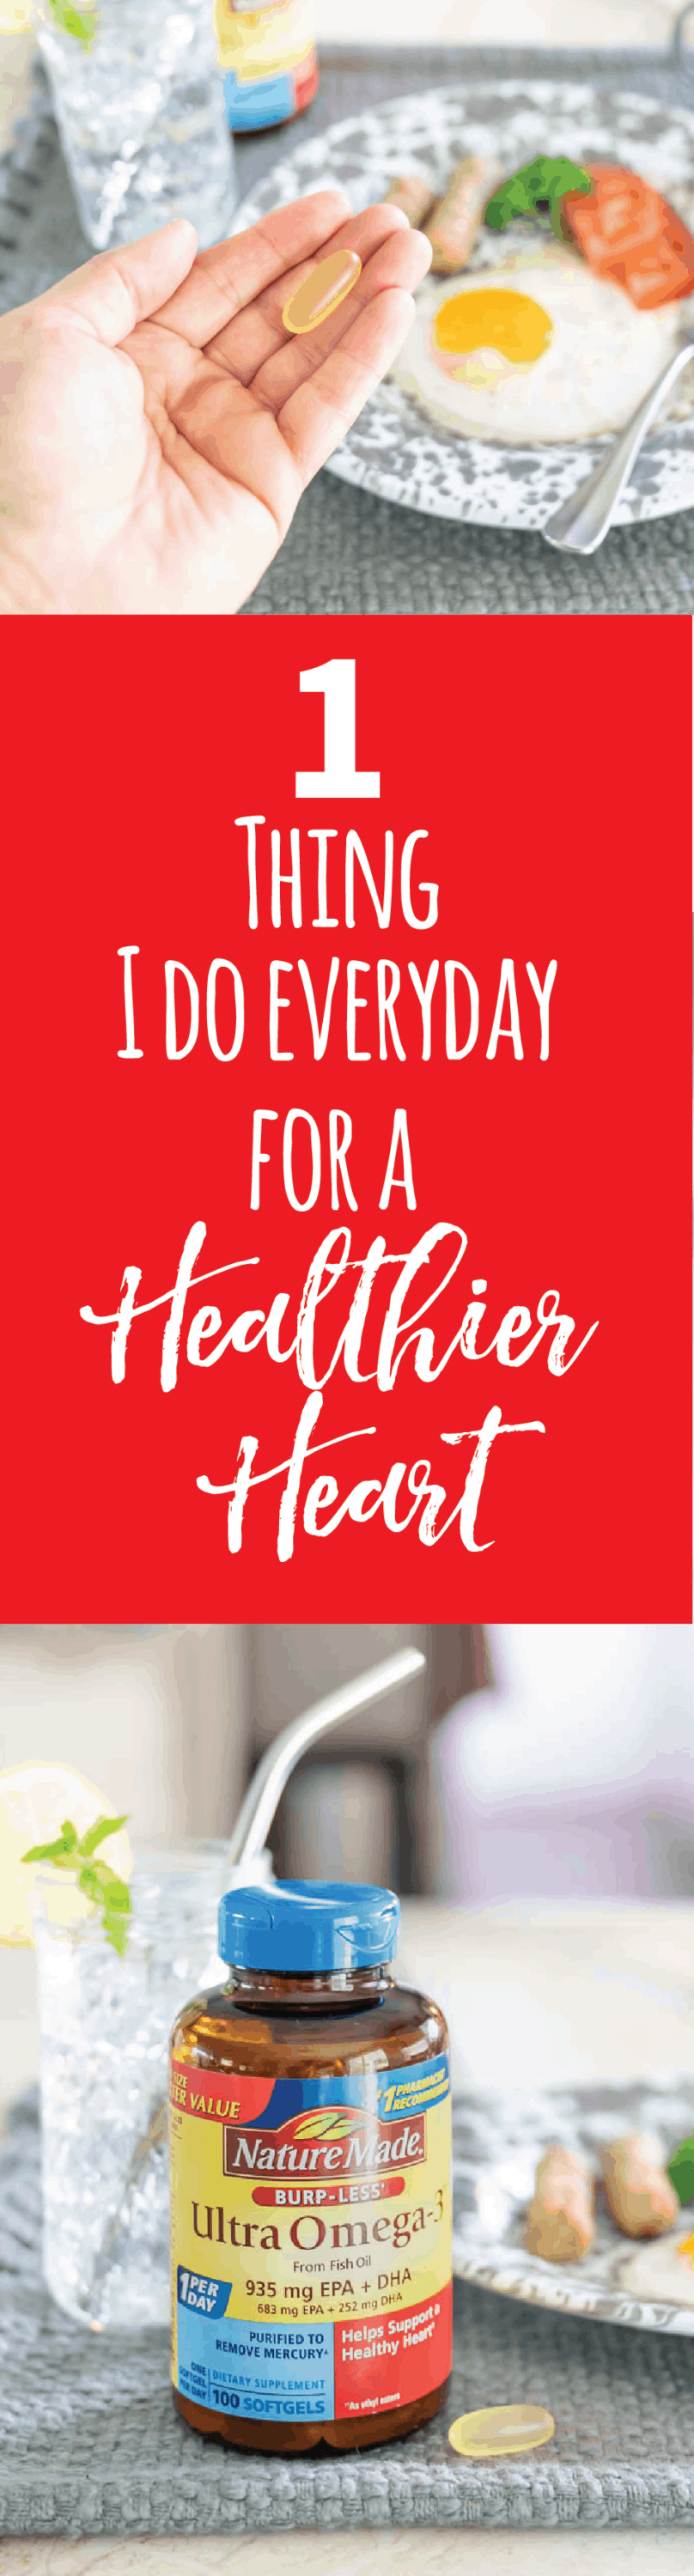 1 Thing I do Every Day for a Healthier Heart #ad #naturemadehearthealth